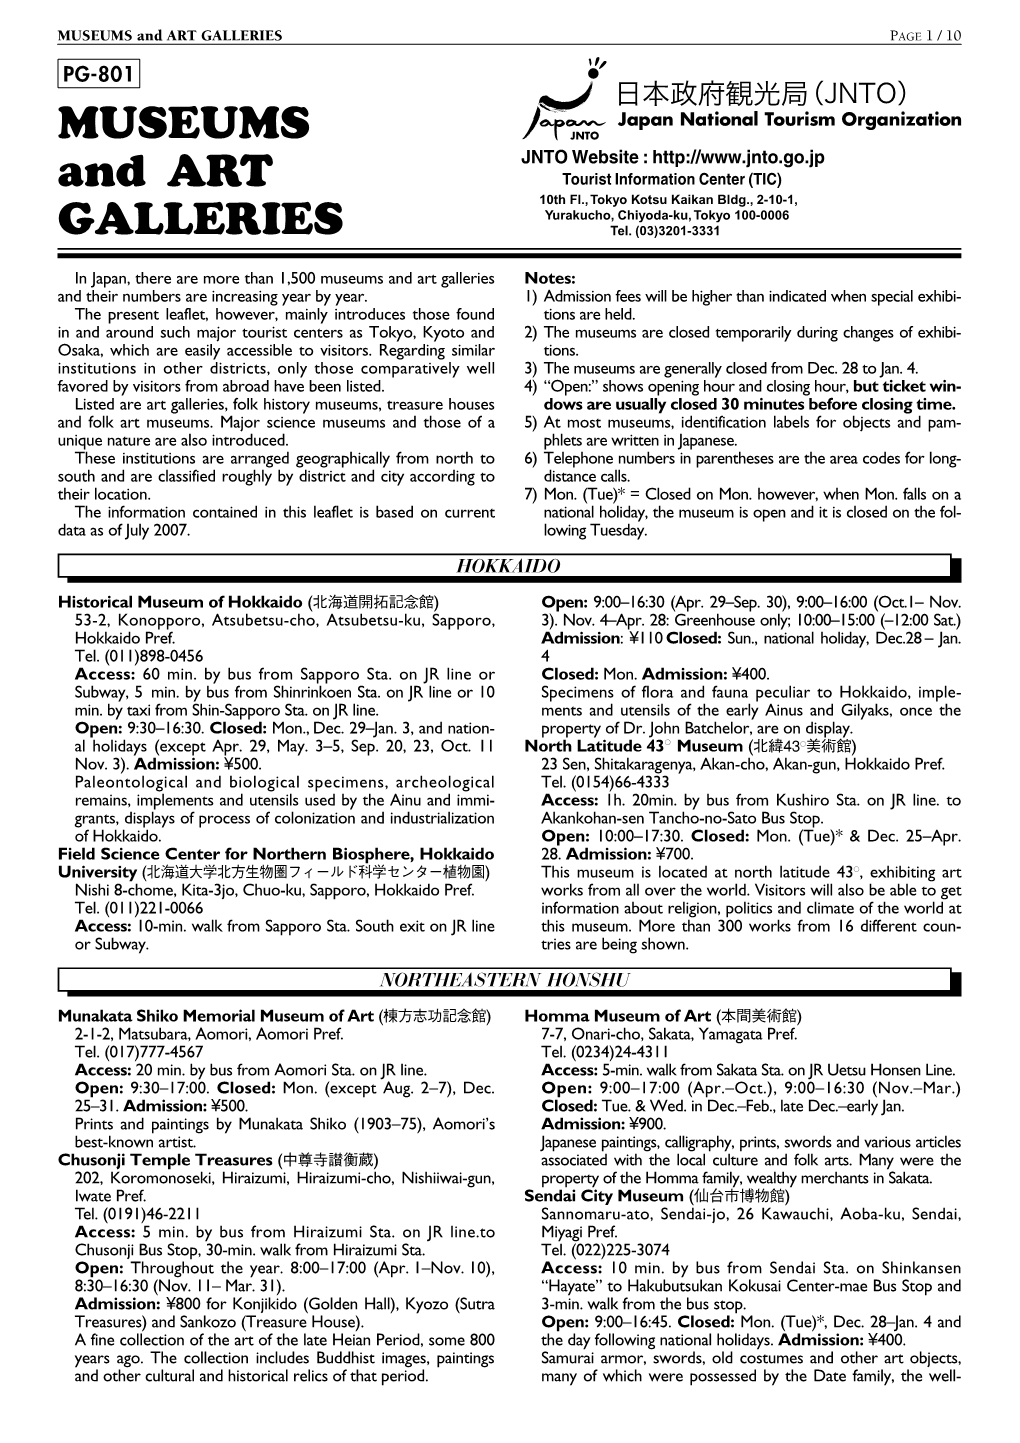 MUSEUMS and ART GALLERIES PAGE 1 / 10